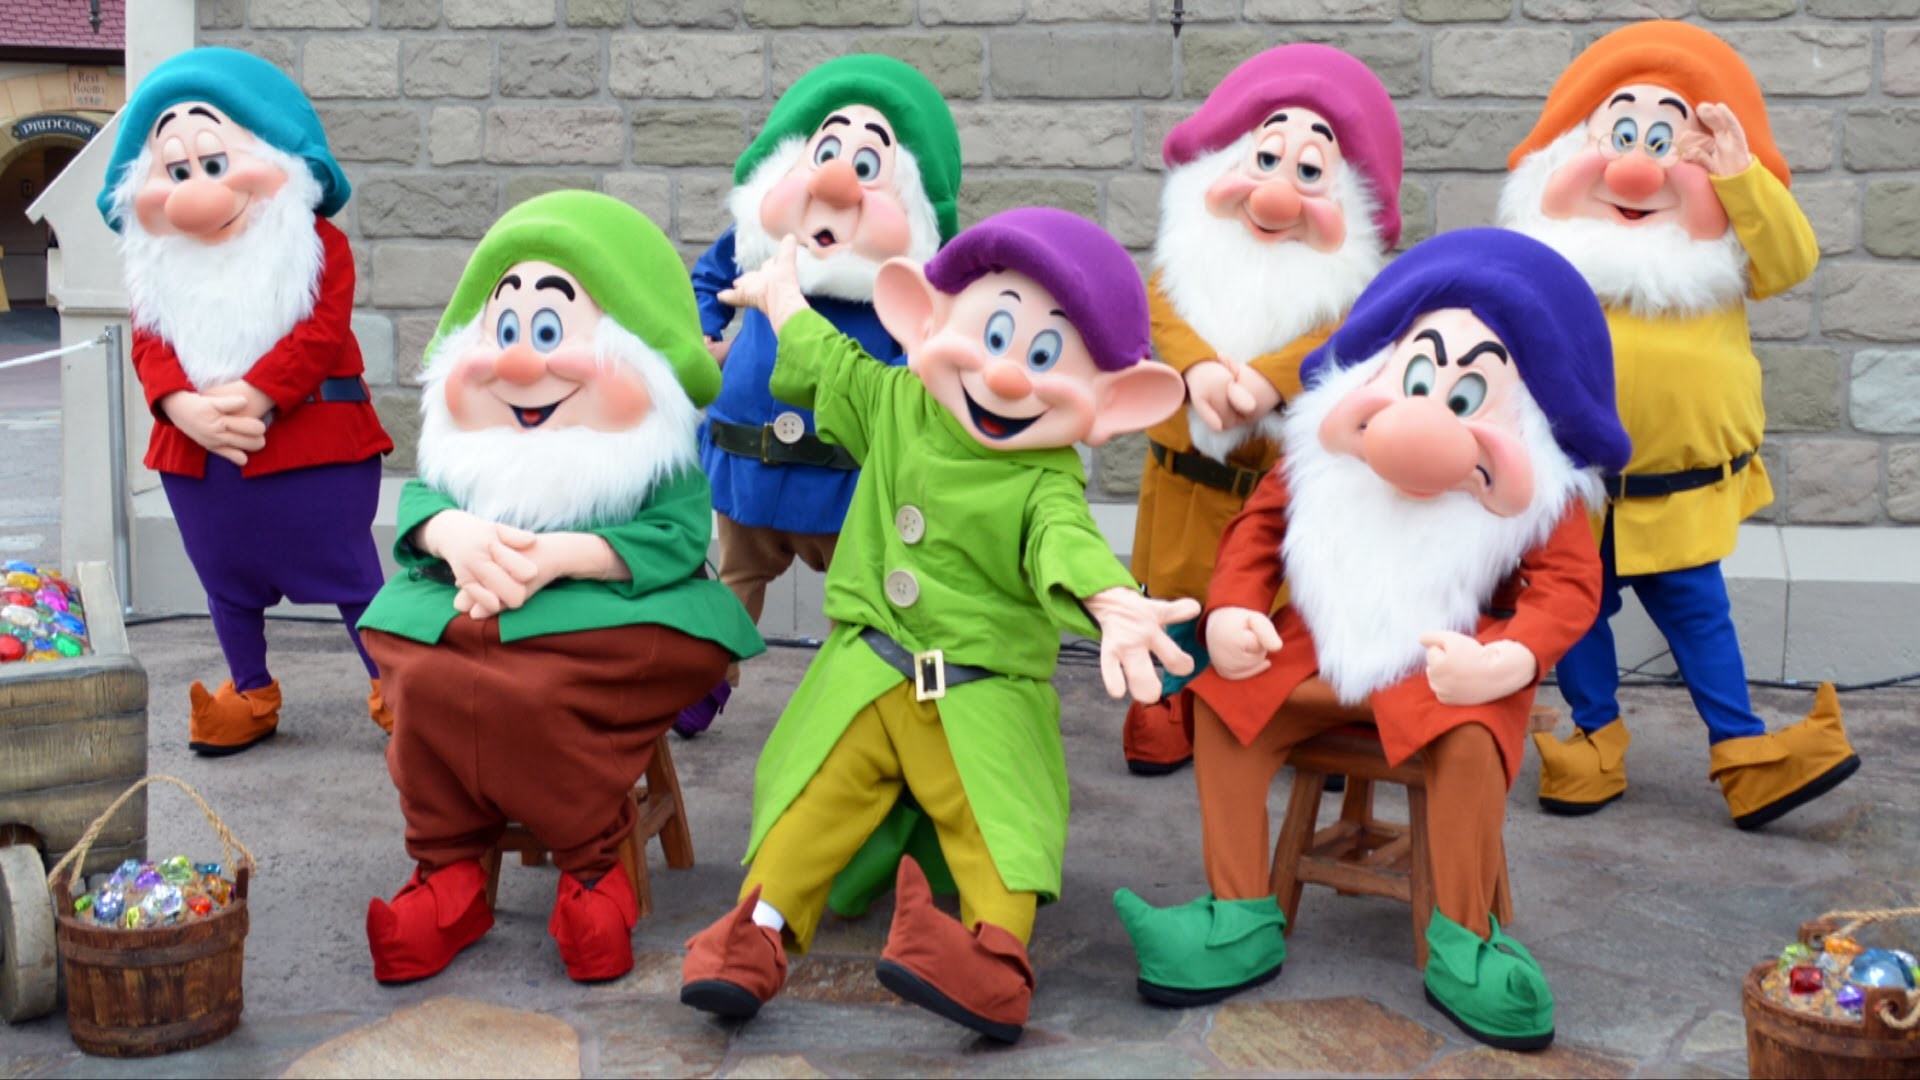 1920x1080 We Meet All Seven Dwarfs at Mickey's Not-So-Scary Halloween ...